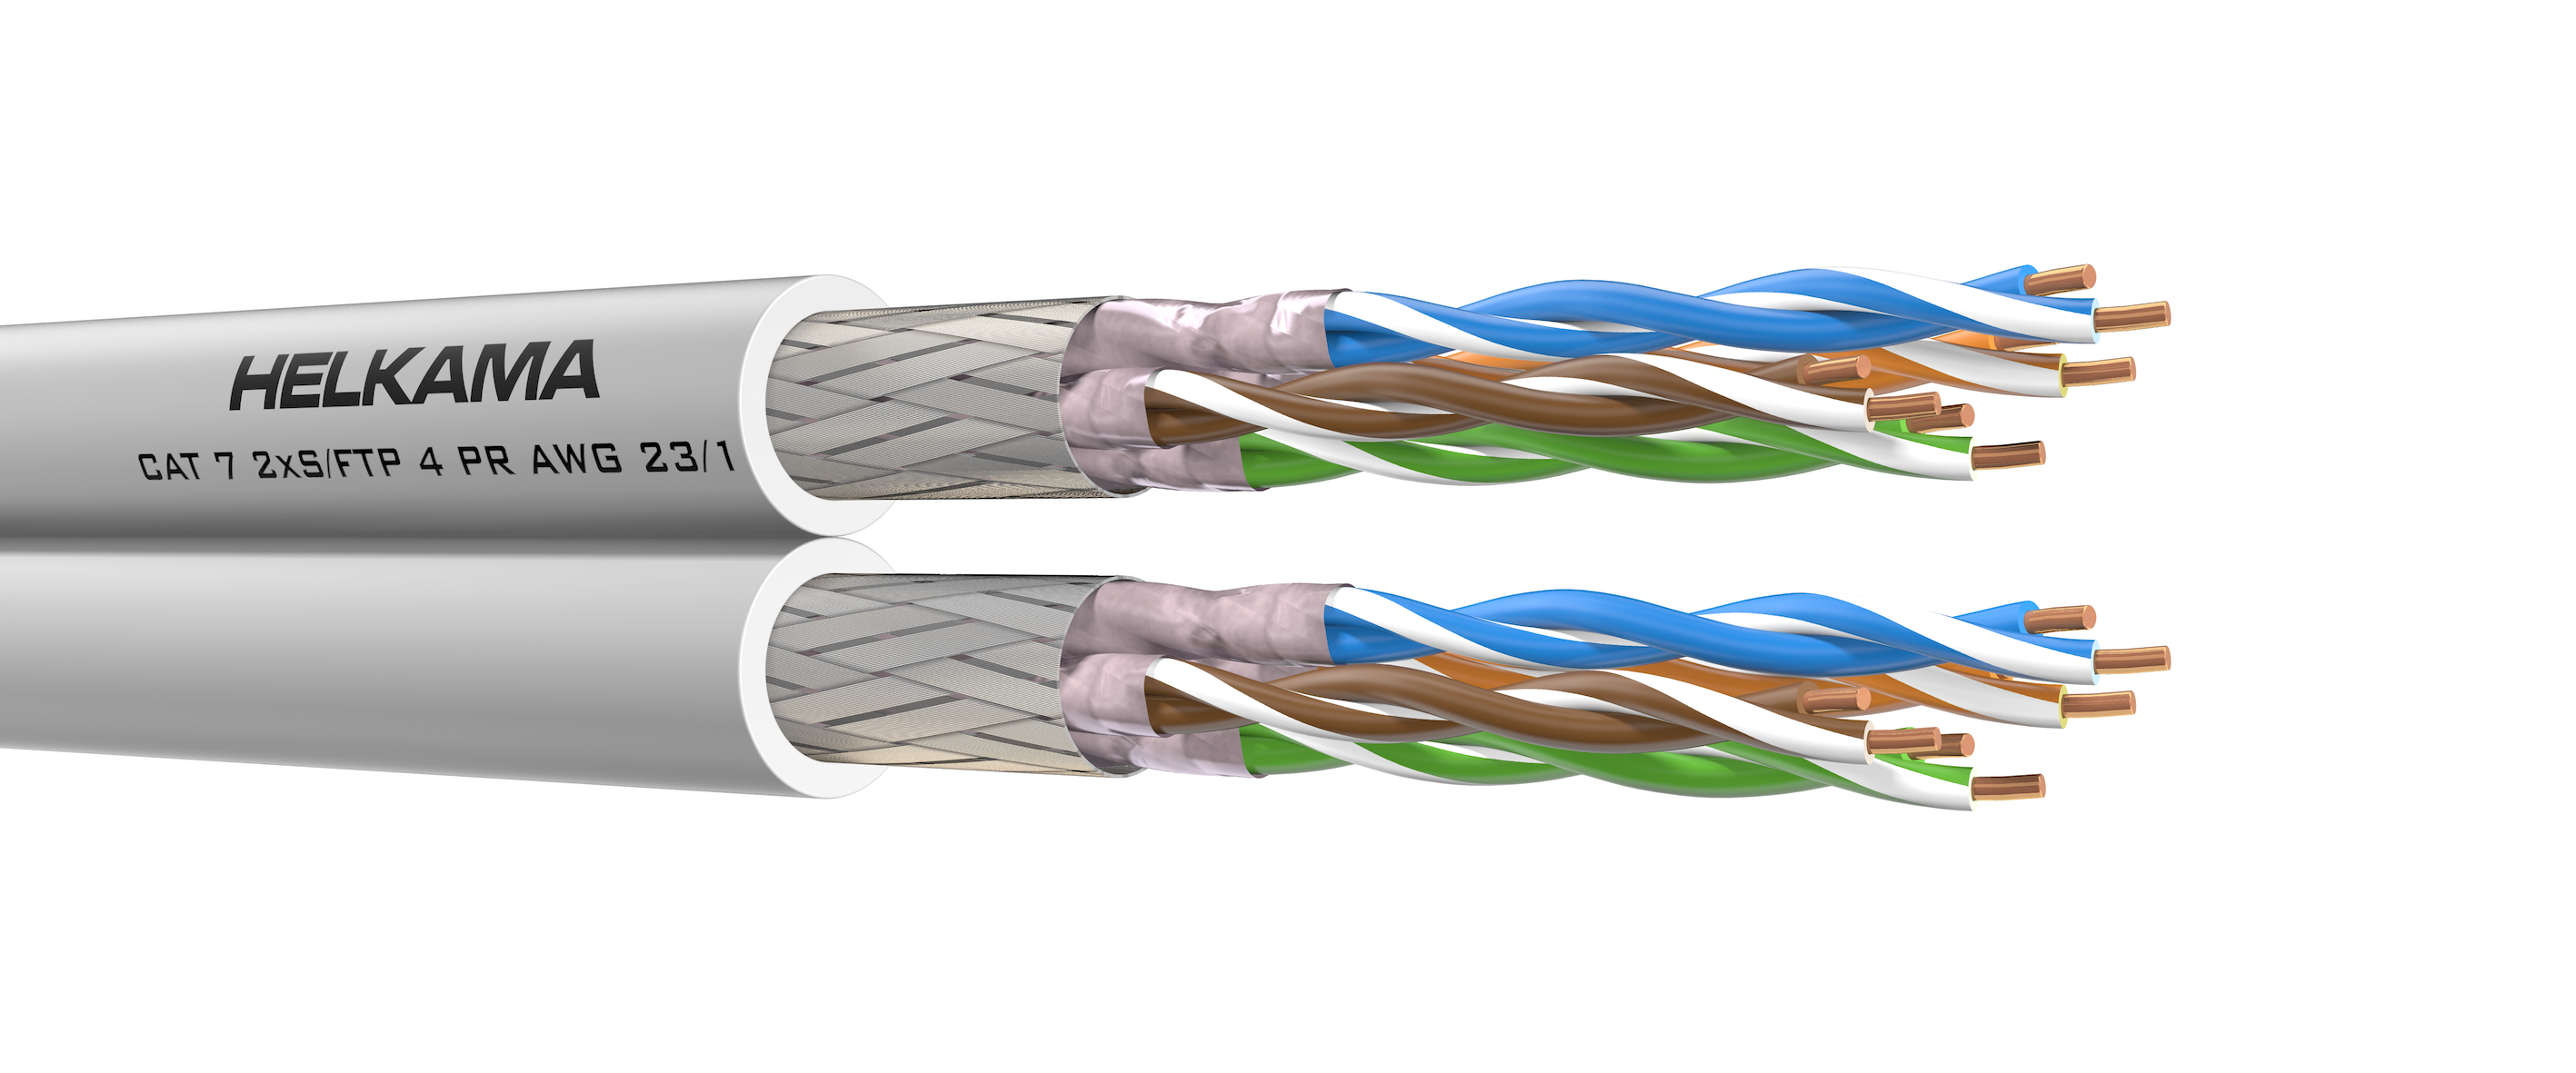 Cable Ethernet CAT 7 Referenz - 3 m